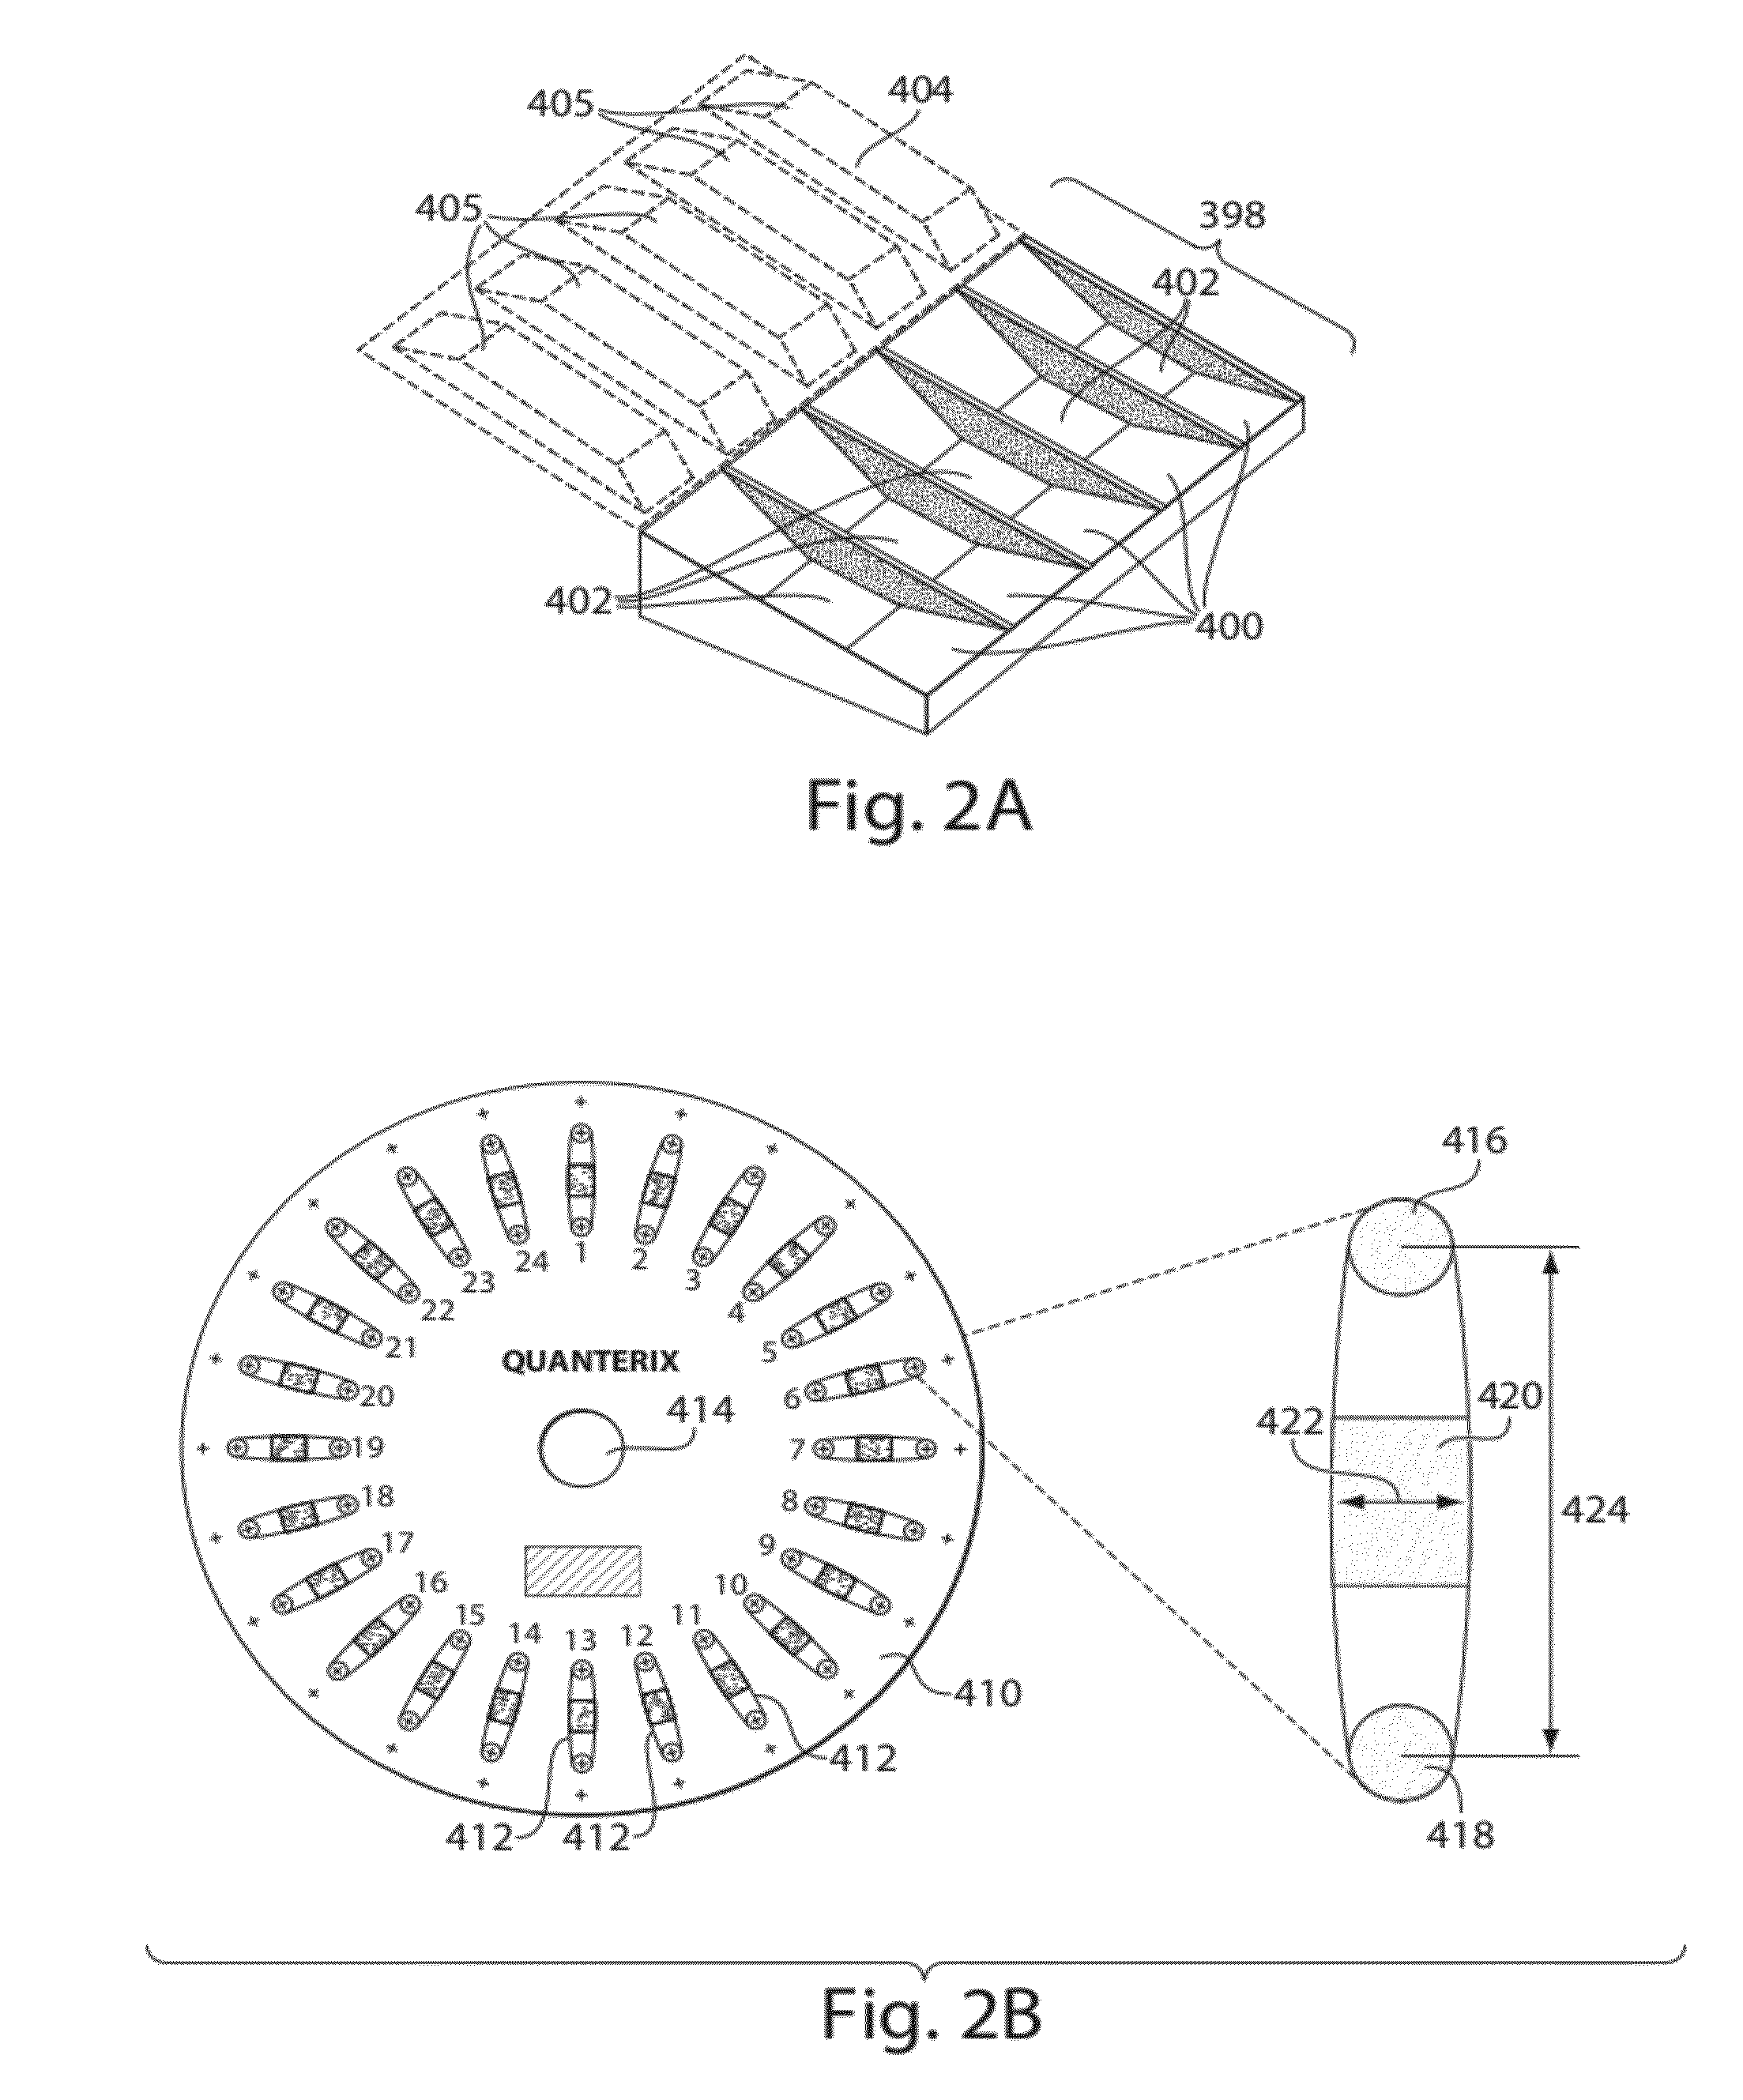 Systems, devices, and methods for ultra-sensitive detection of molecules or particles